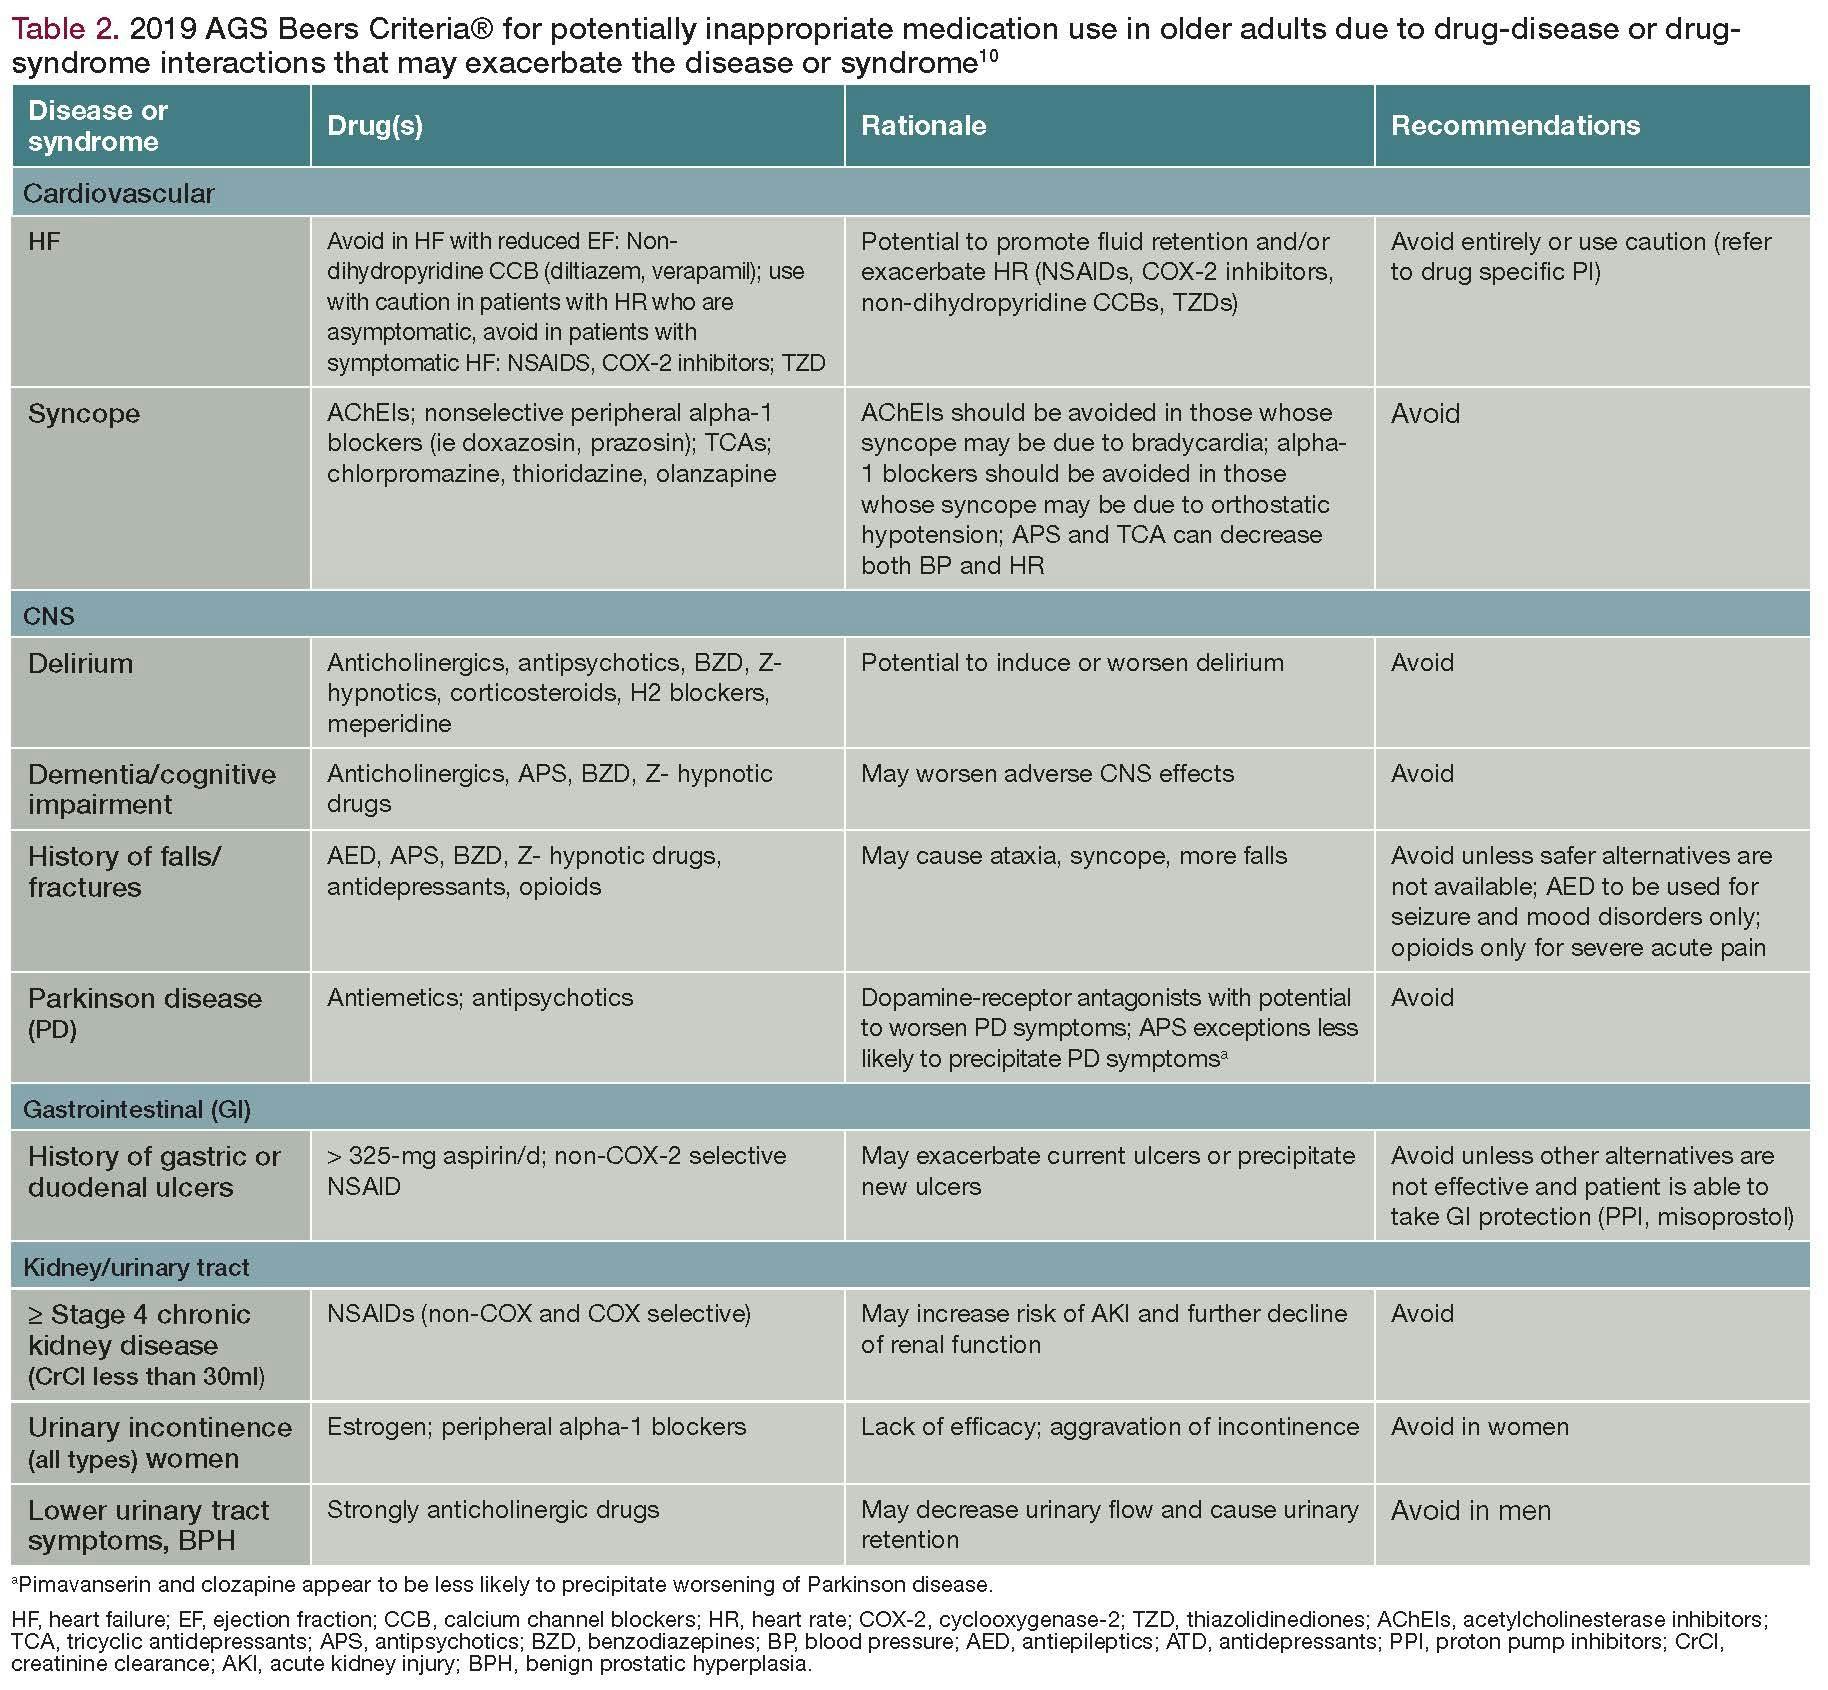 Table 2. 2019 AGS Beers Criteria® for potentially inappropriate medication use in older adults due to drug-disease or drugsyndrome interactions that may exacerbate the disease or syndrome